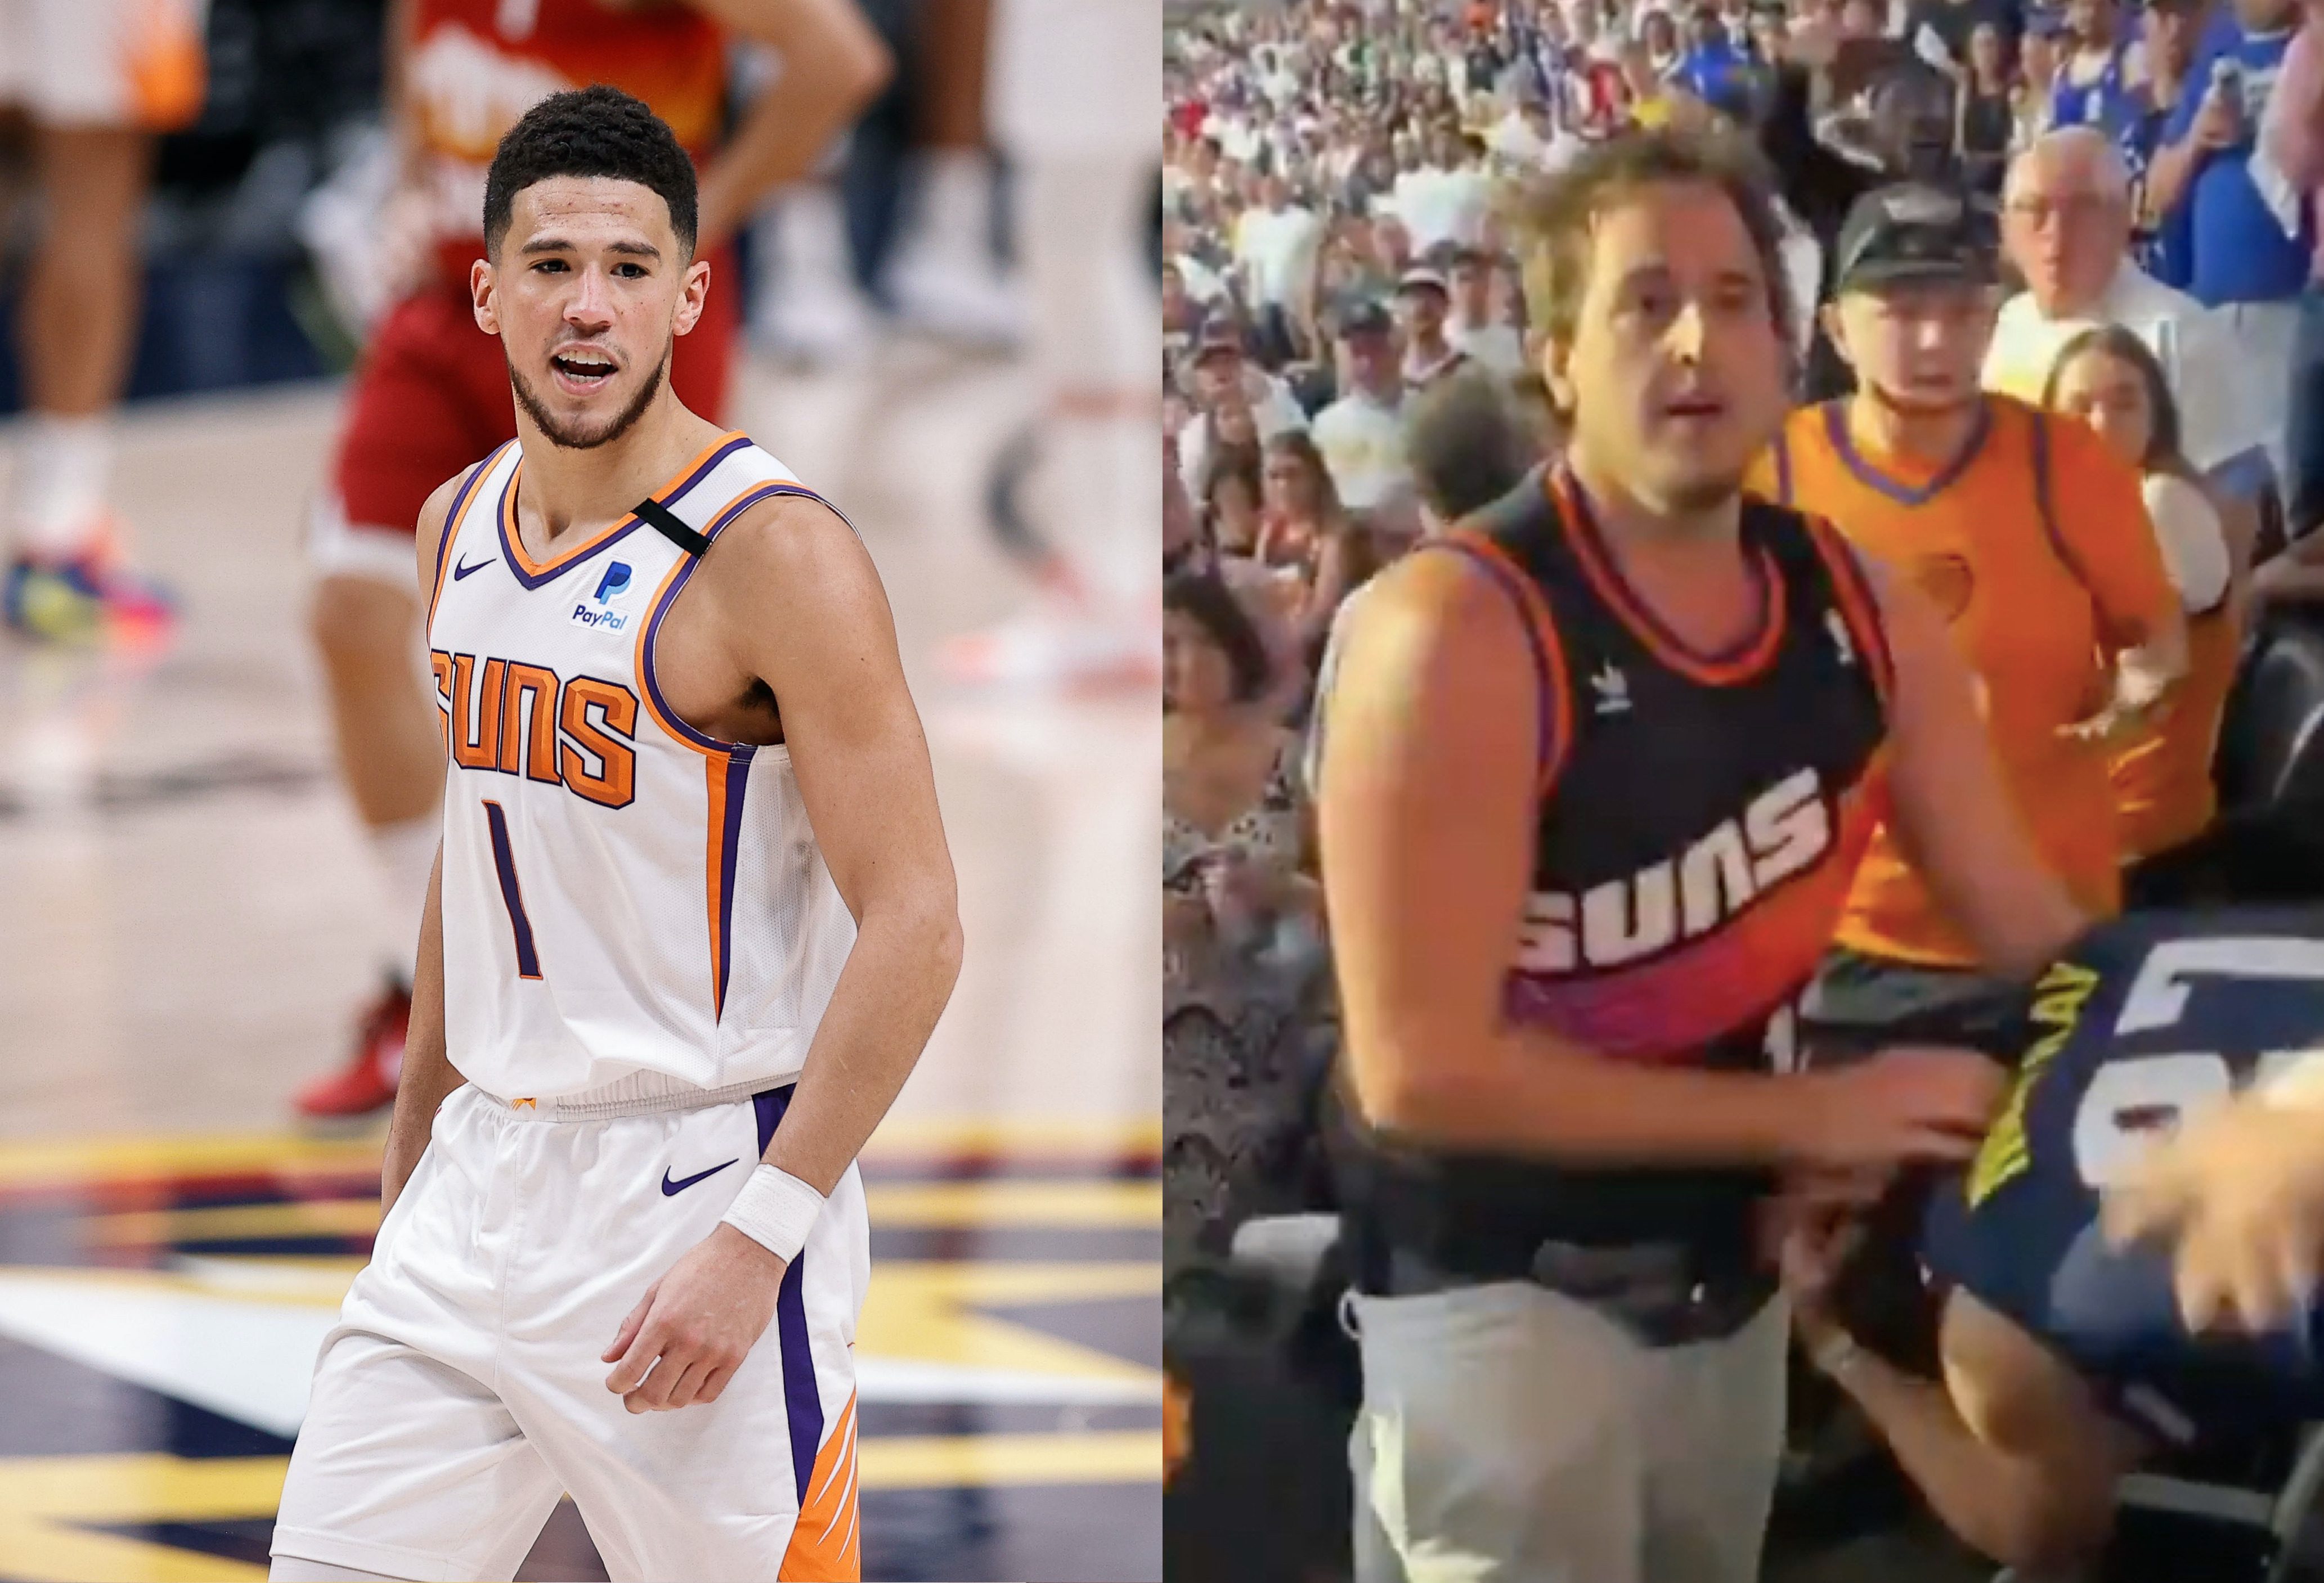 Devin Booker takes care of Suns fan in viral arena fight